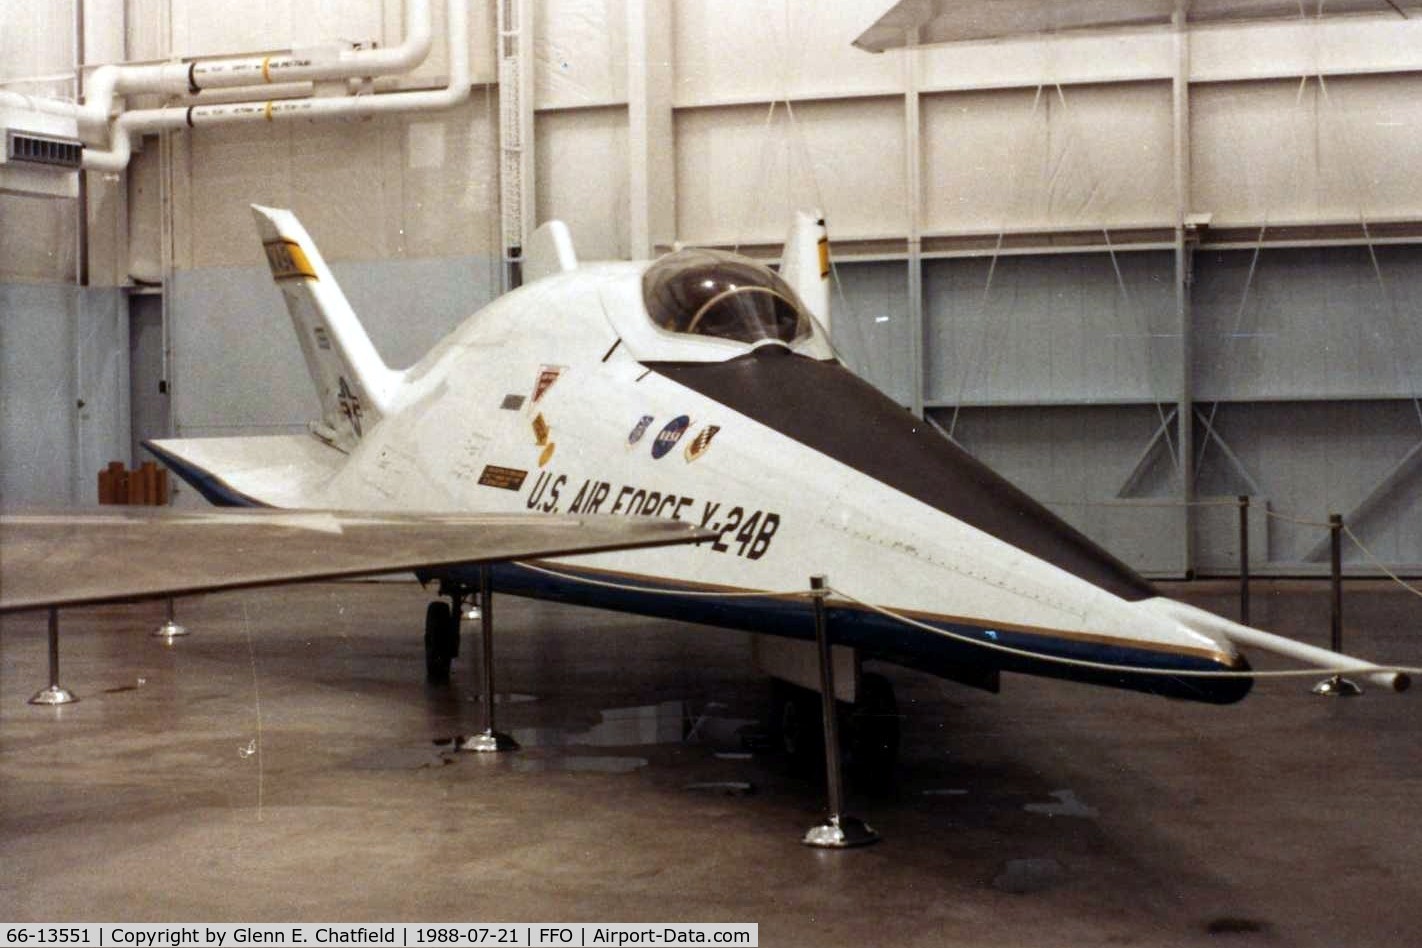 66-13551, 1972 Martin Marietta X-24B C/N Not found, X-24B at the National Museum of the U.S. Air Force